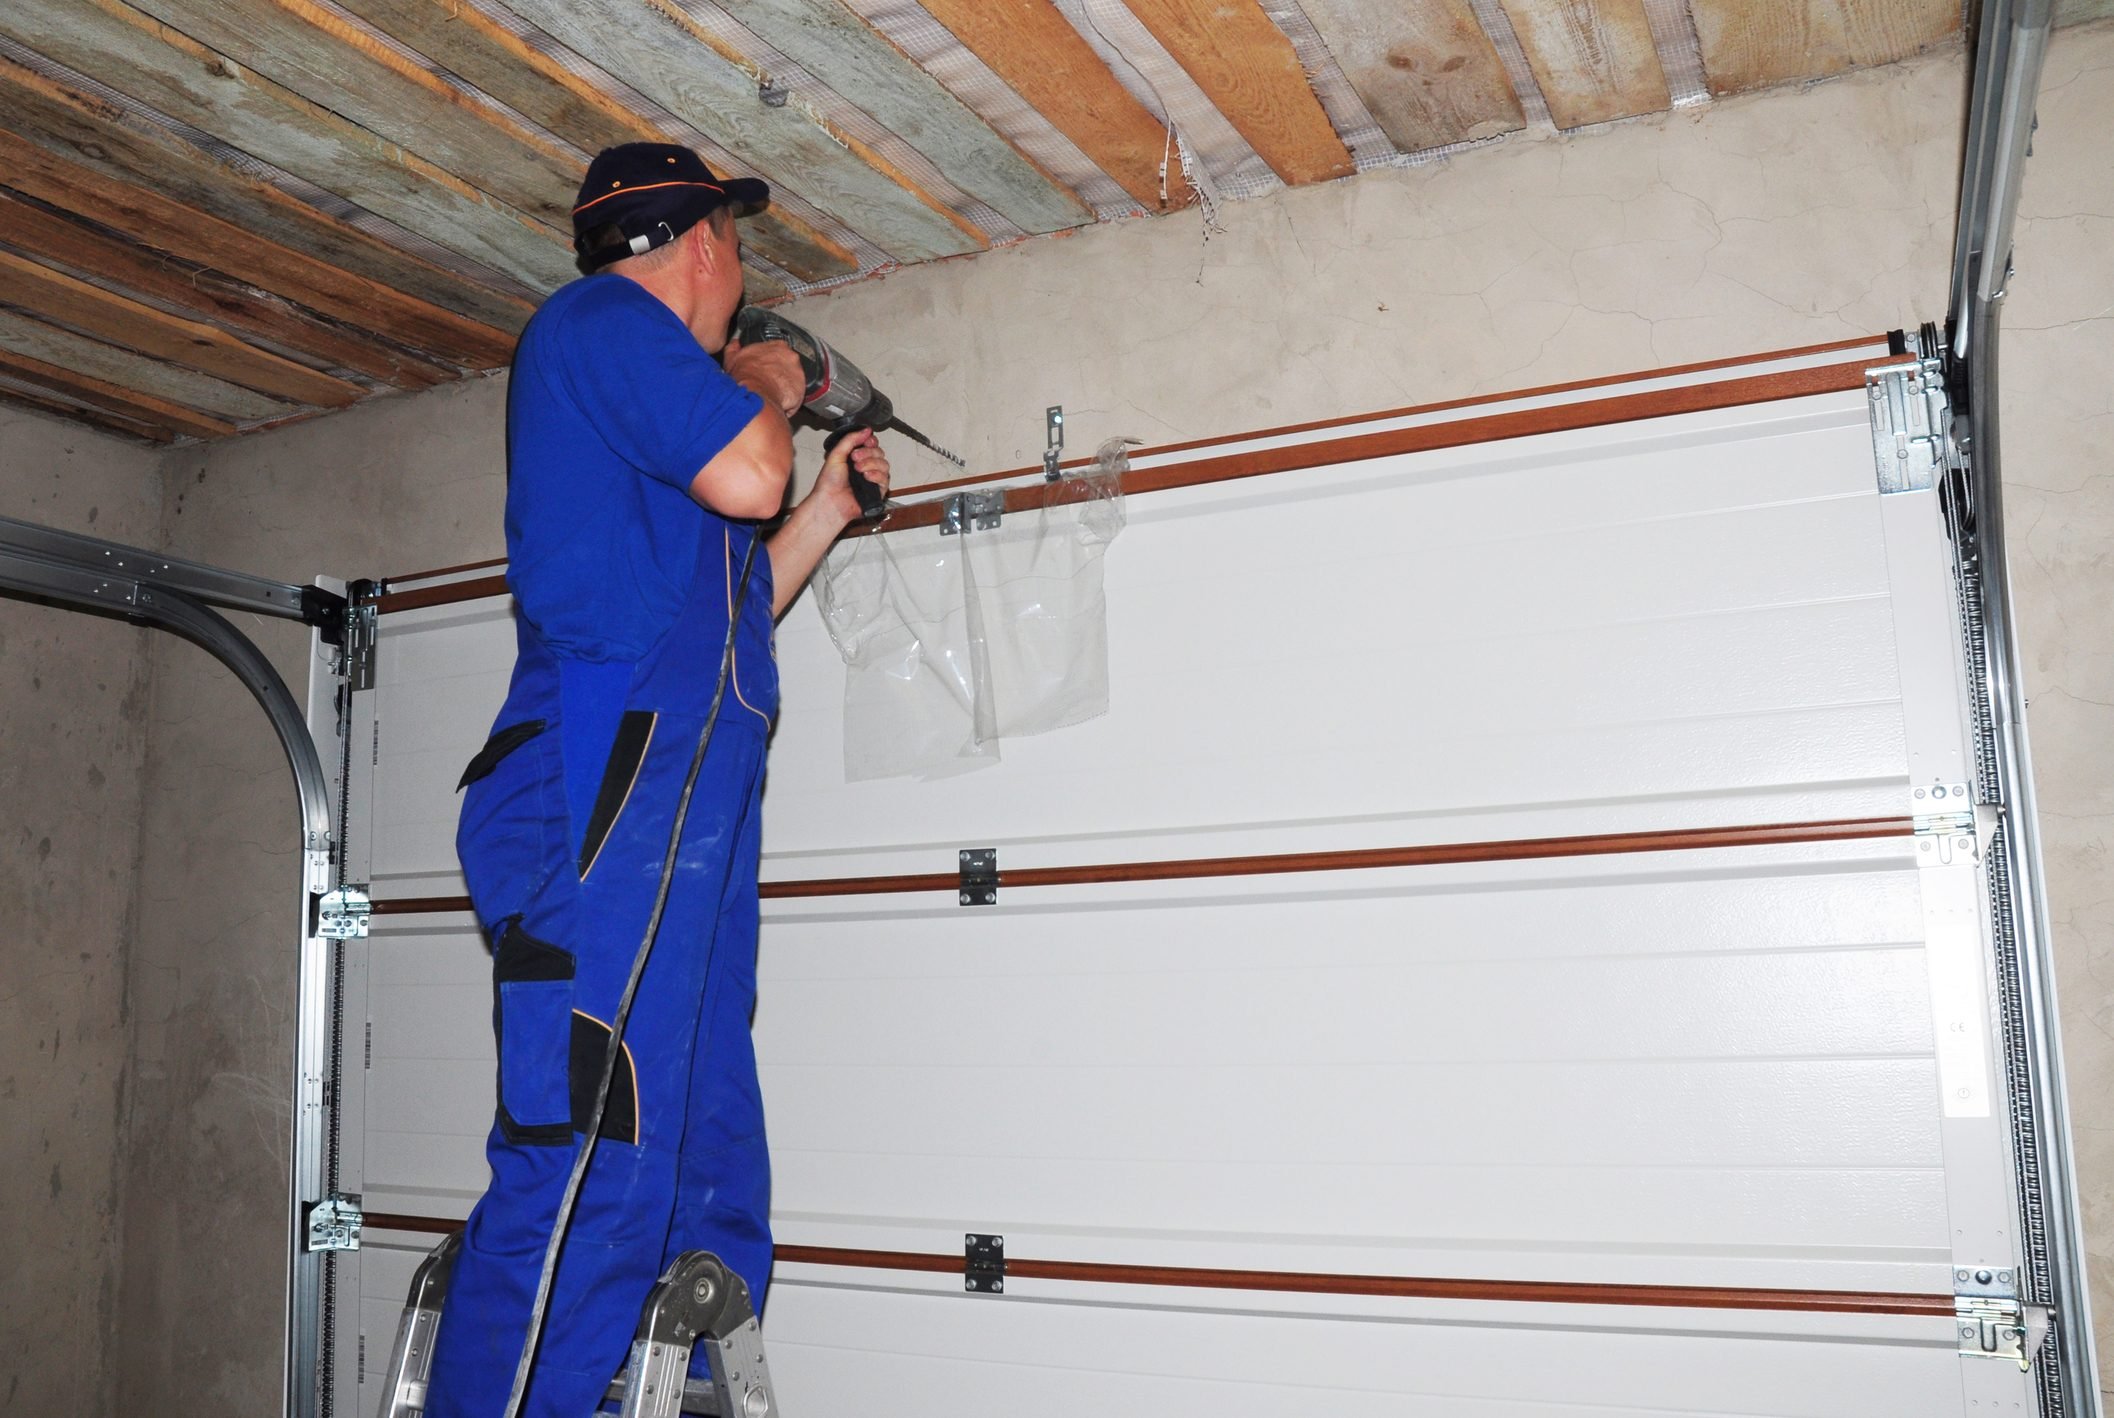 How Much Does It Cost to Install a Garage Door?